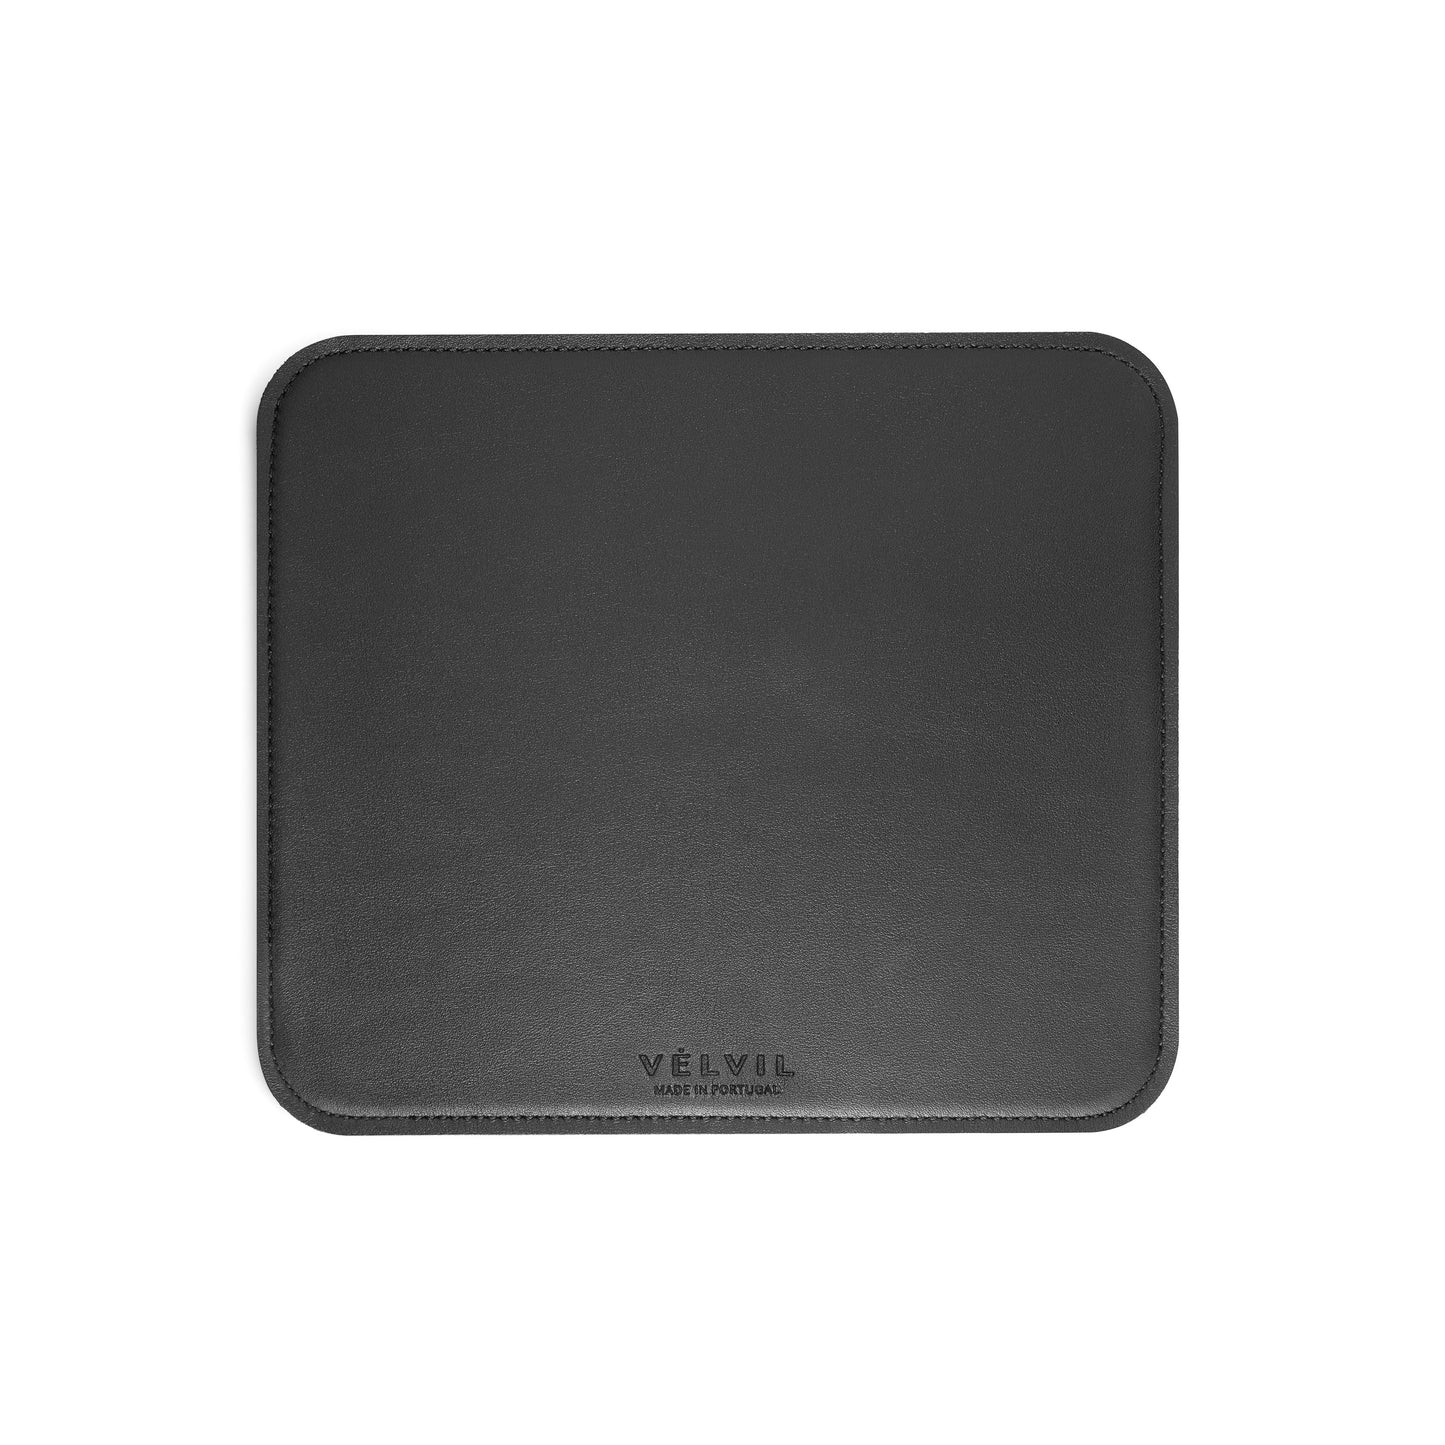 Softgrip Leather Mouse Pad